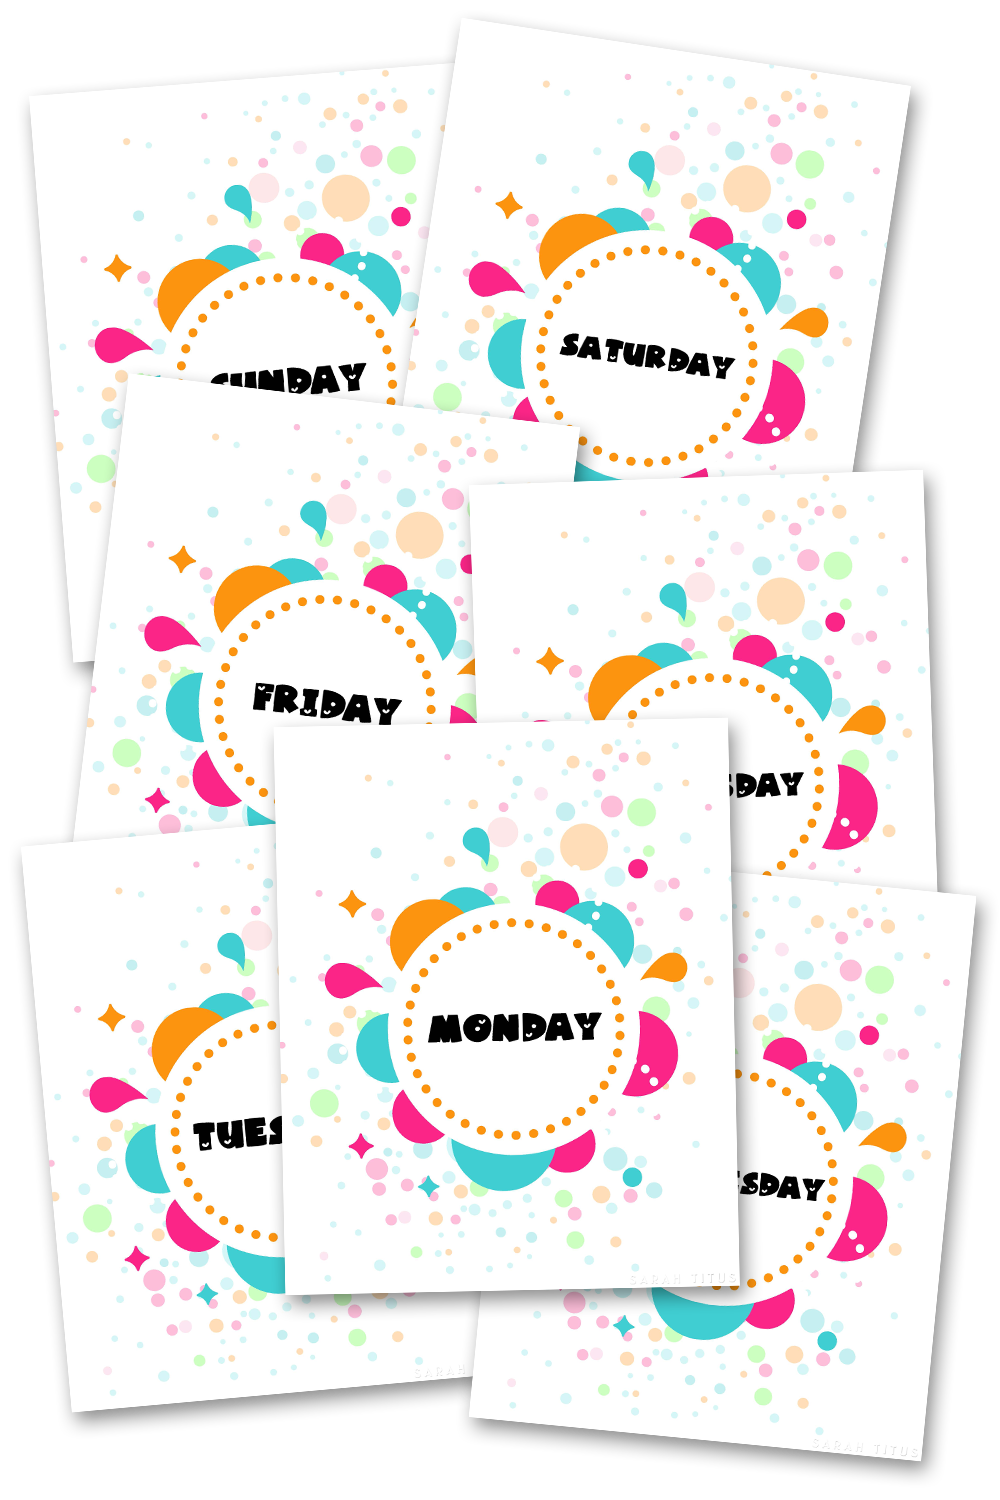 Days of the Week Binder Covers